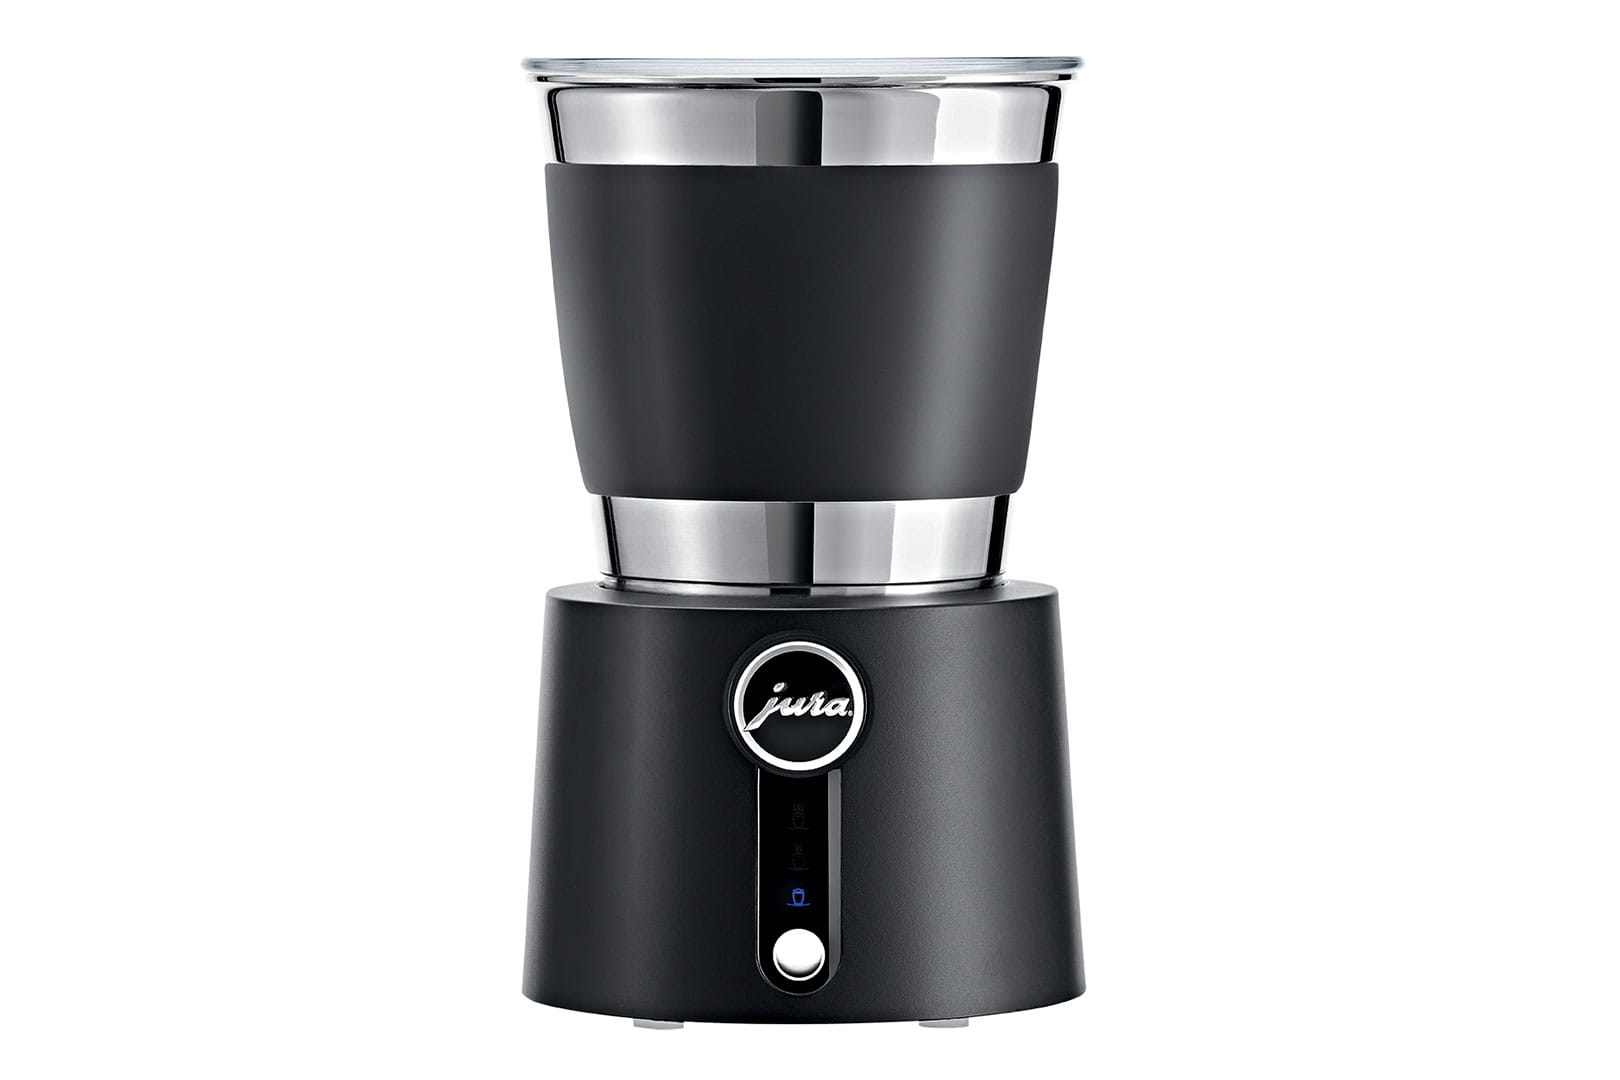 https://es.jura.com/-/media/global/images/home-products/milk-frother/image-gallery-milk-frother-hot-and-cold/milkfrother1.jpg